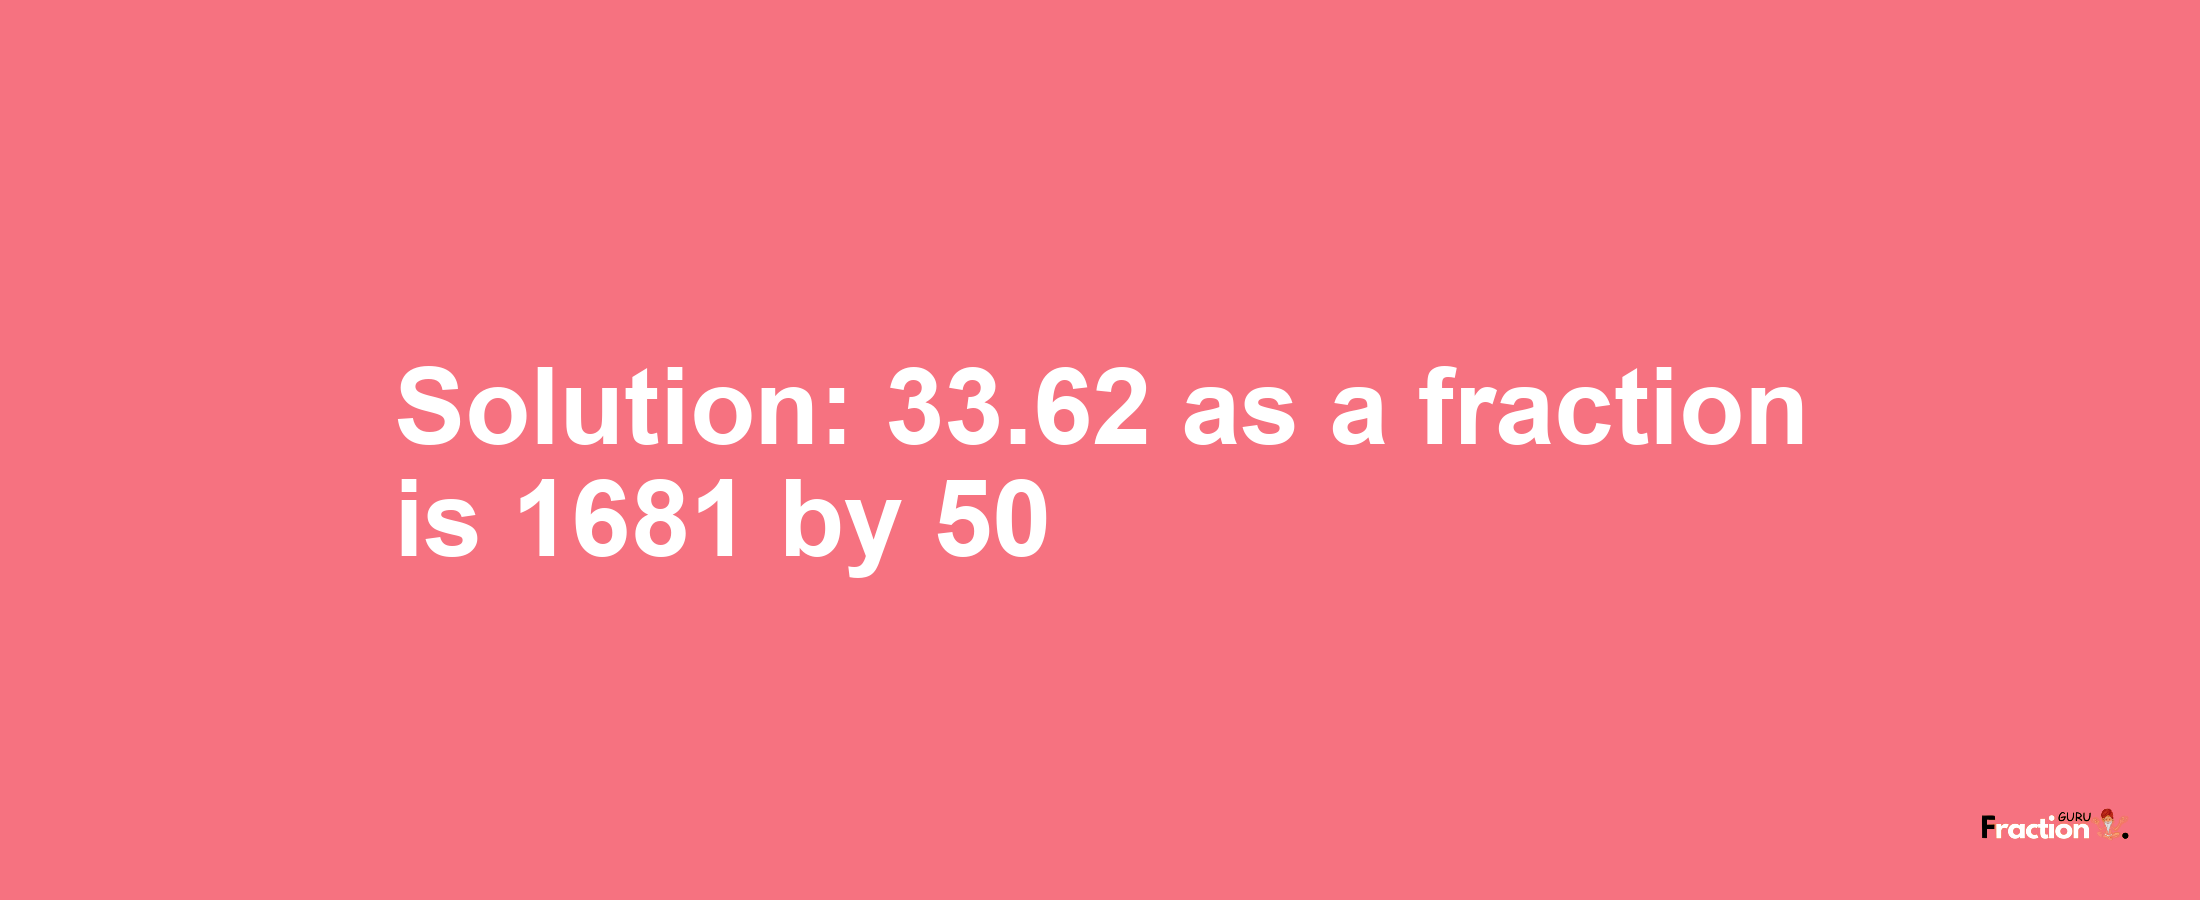 Solution:33.62 as a fraction is 1681/50